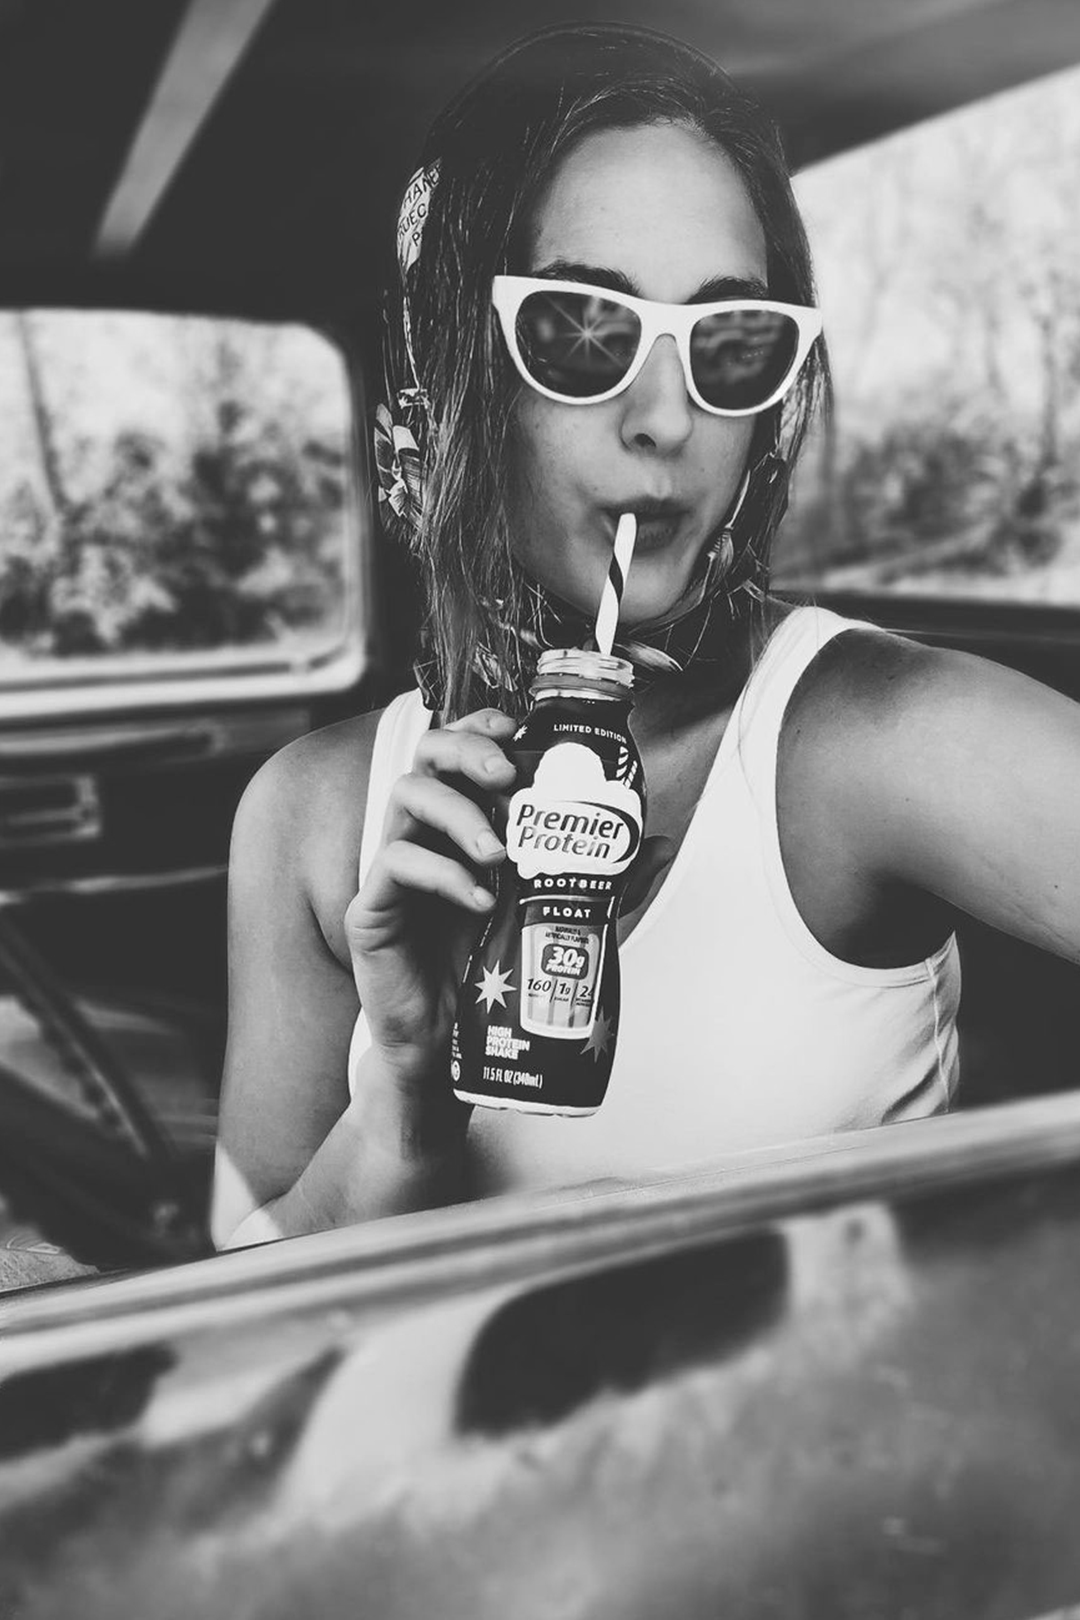 Black and white photo of a woman in sunglasses sitting in a car while drinking Premier Protein Root Beer Float shake from a straw